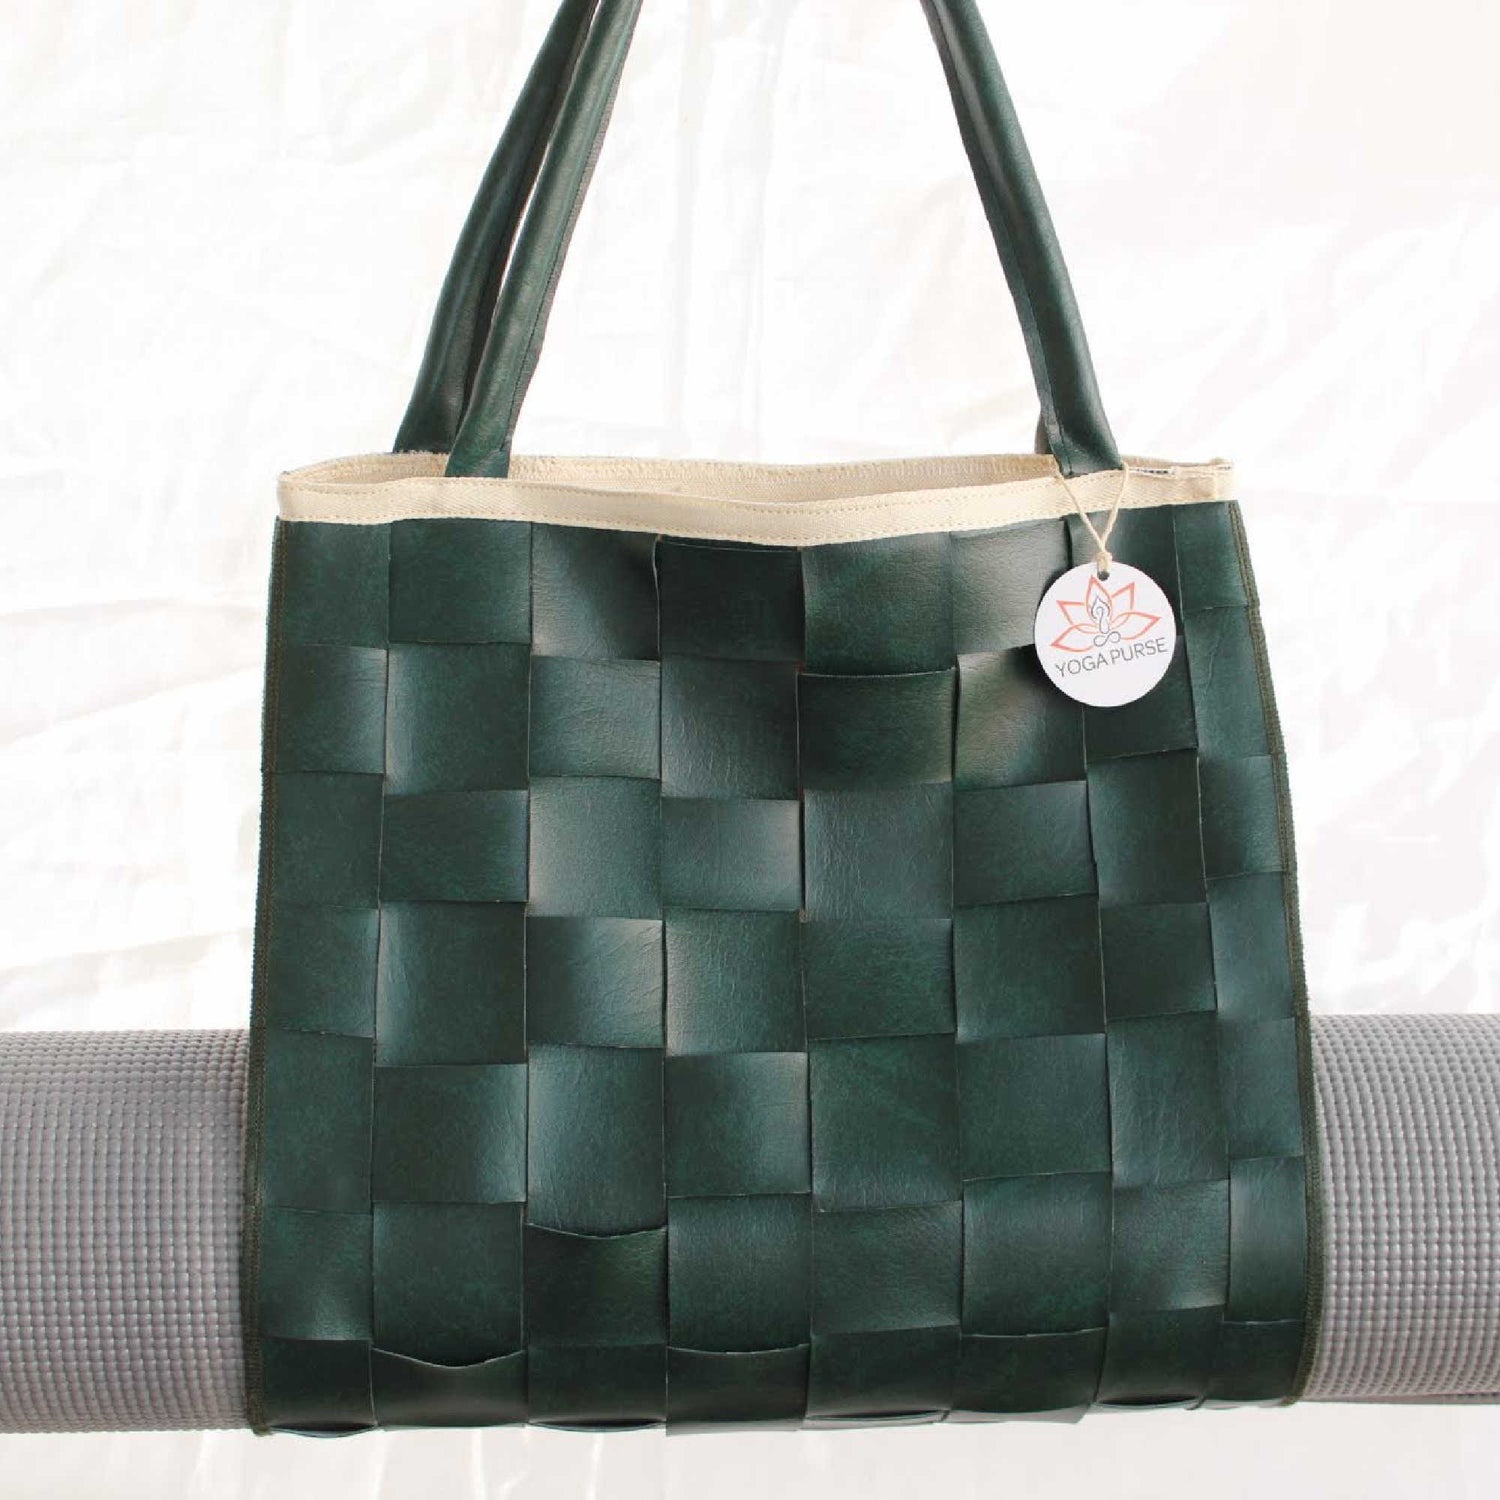 vegan leather yoga Mat carrier bag with tote bag green